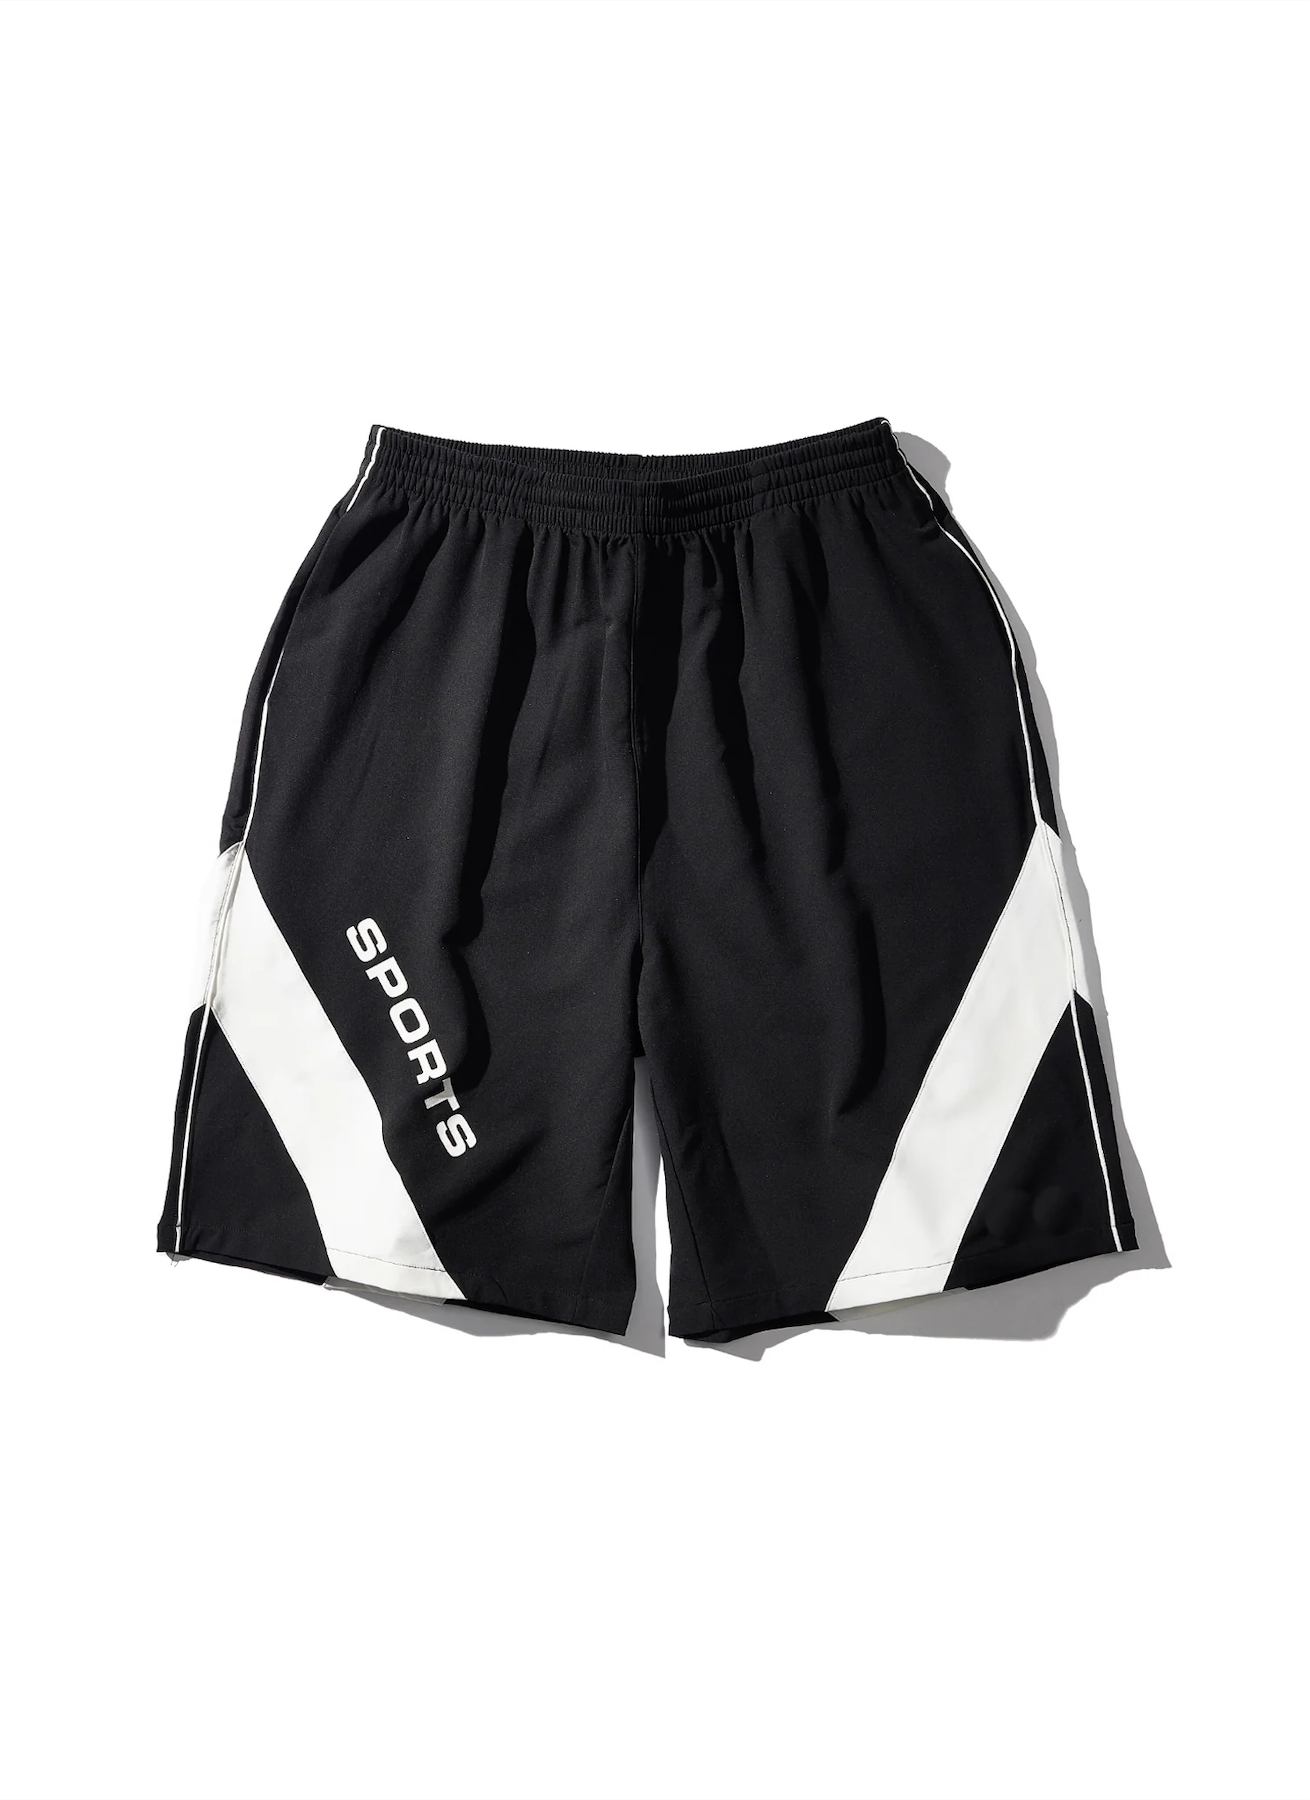 WILLY SPORTS PREGAME SHORT - BLACK — WILLY CHAVARRIA